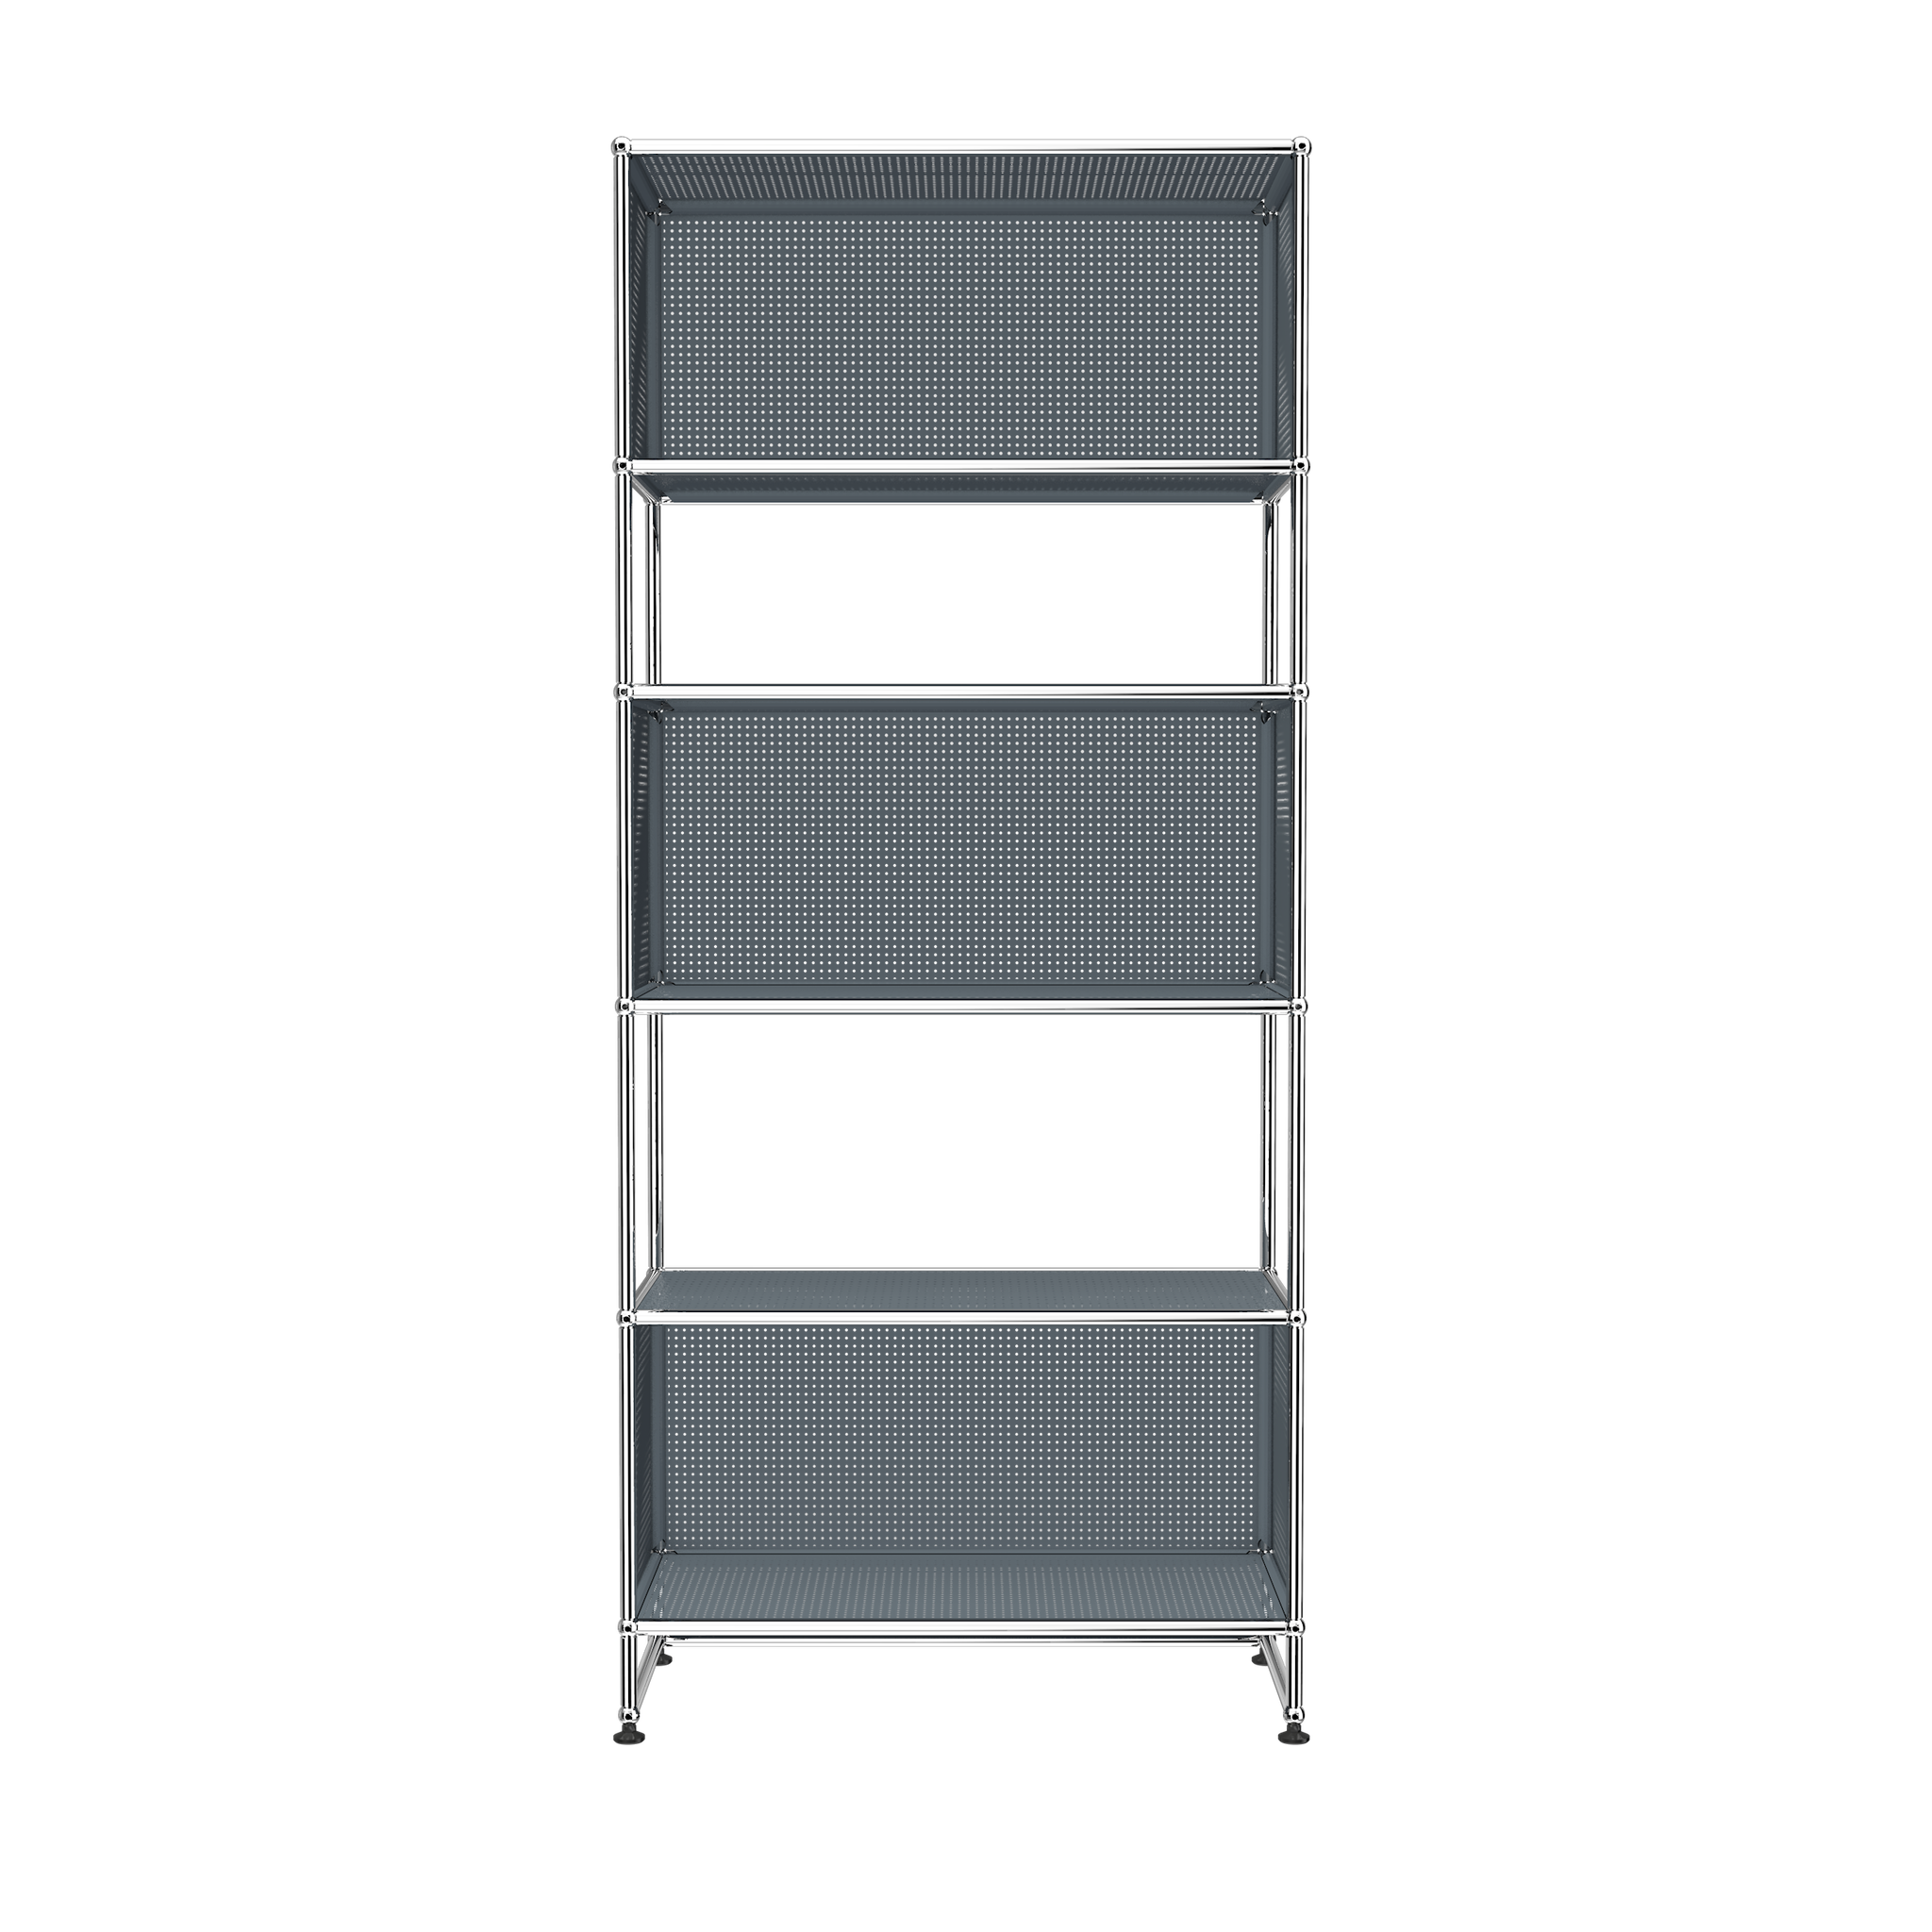 USM Haller 3 Box Shelving with Perforated Panels (RE119) in Mid Gray